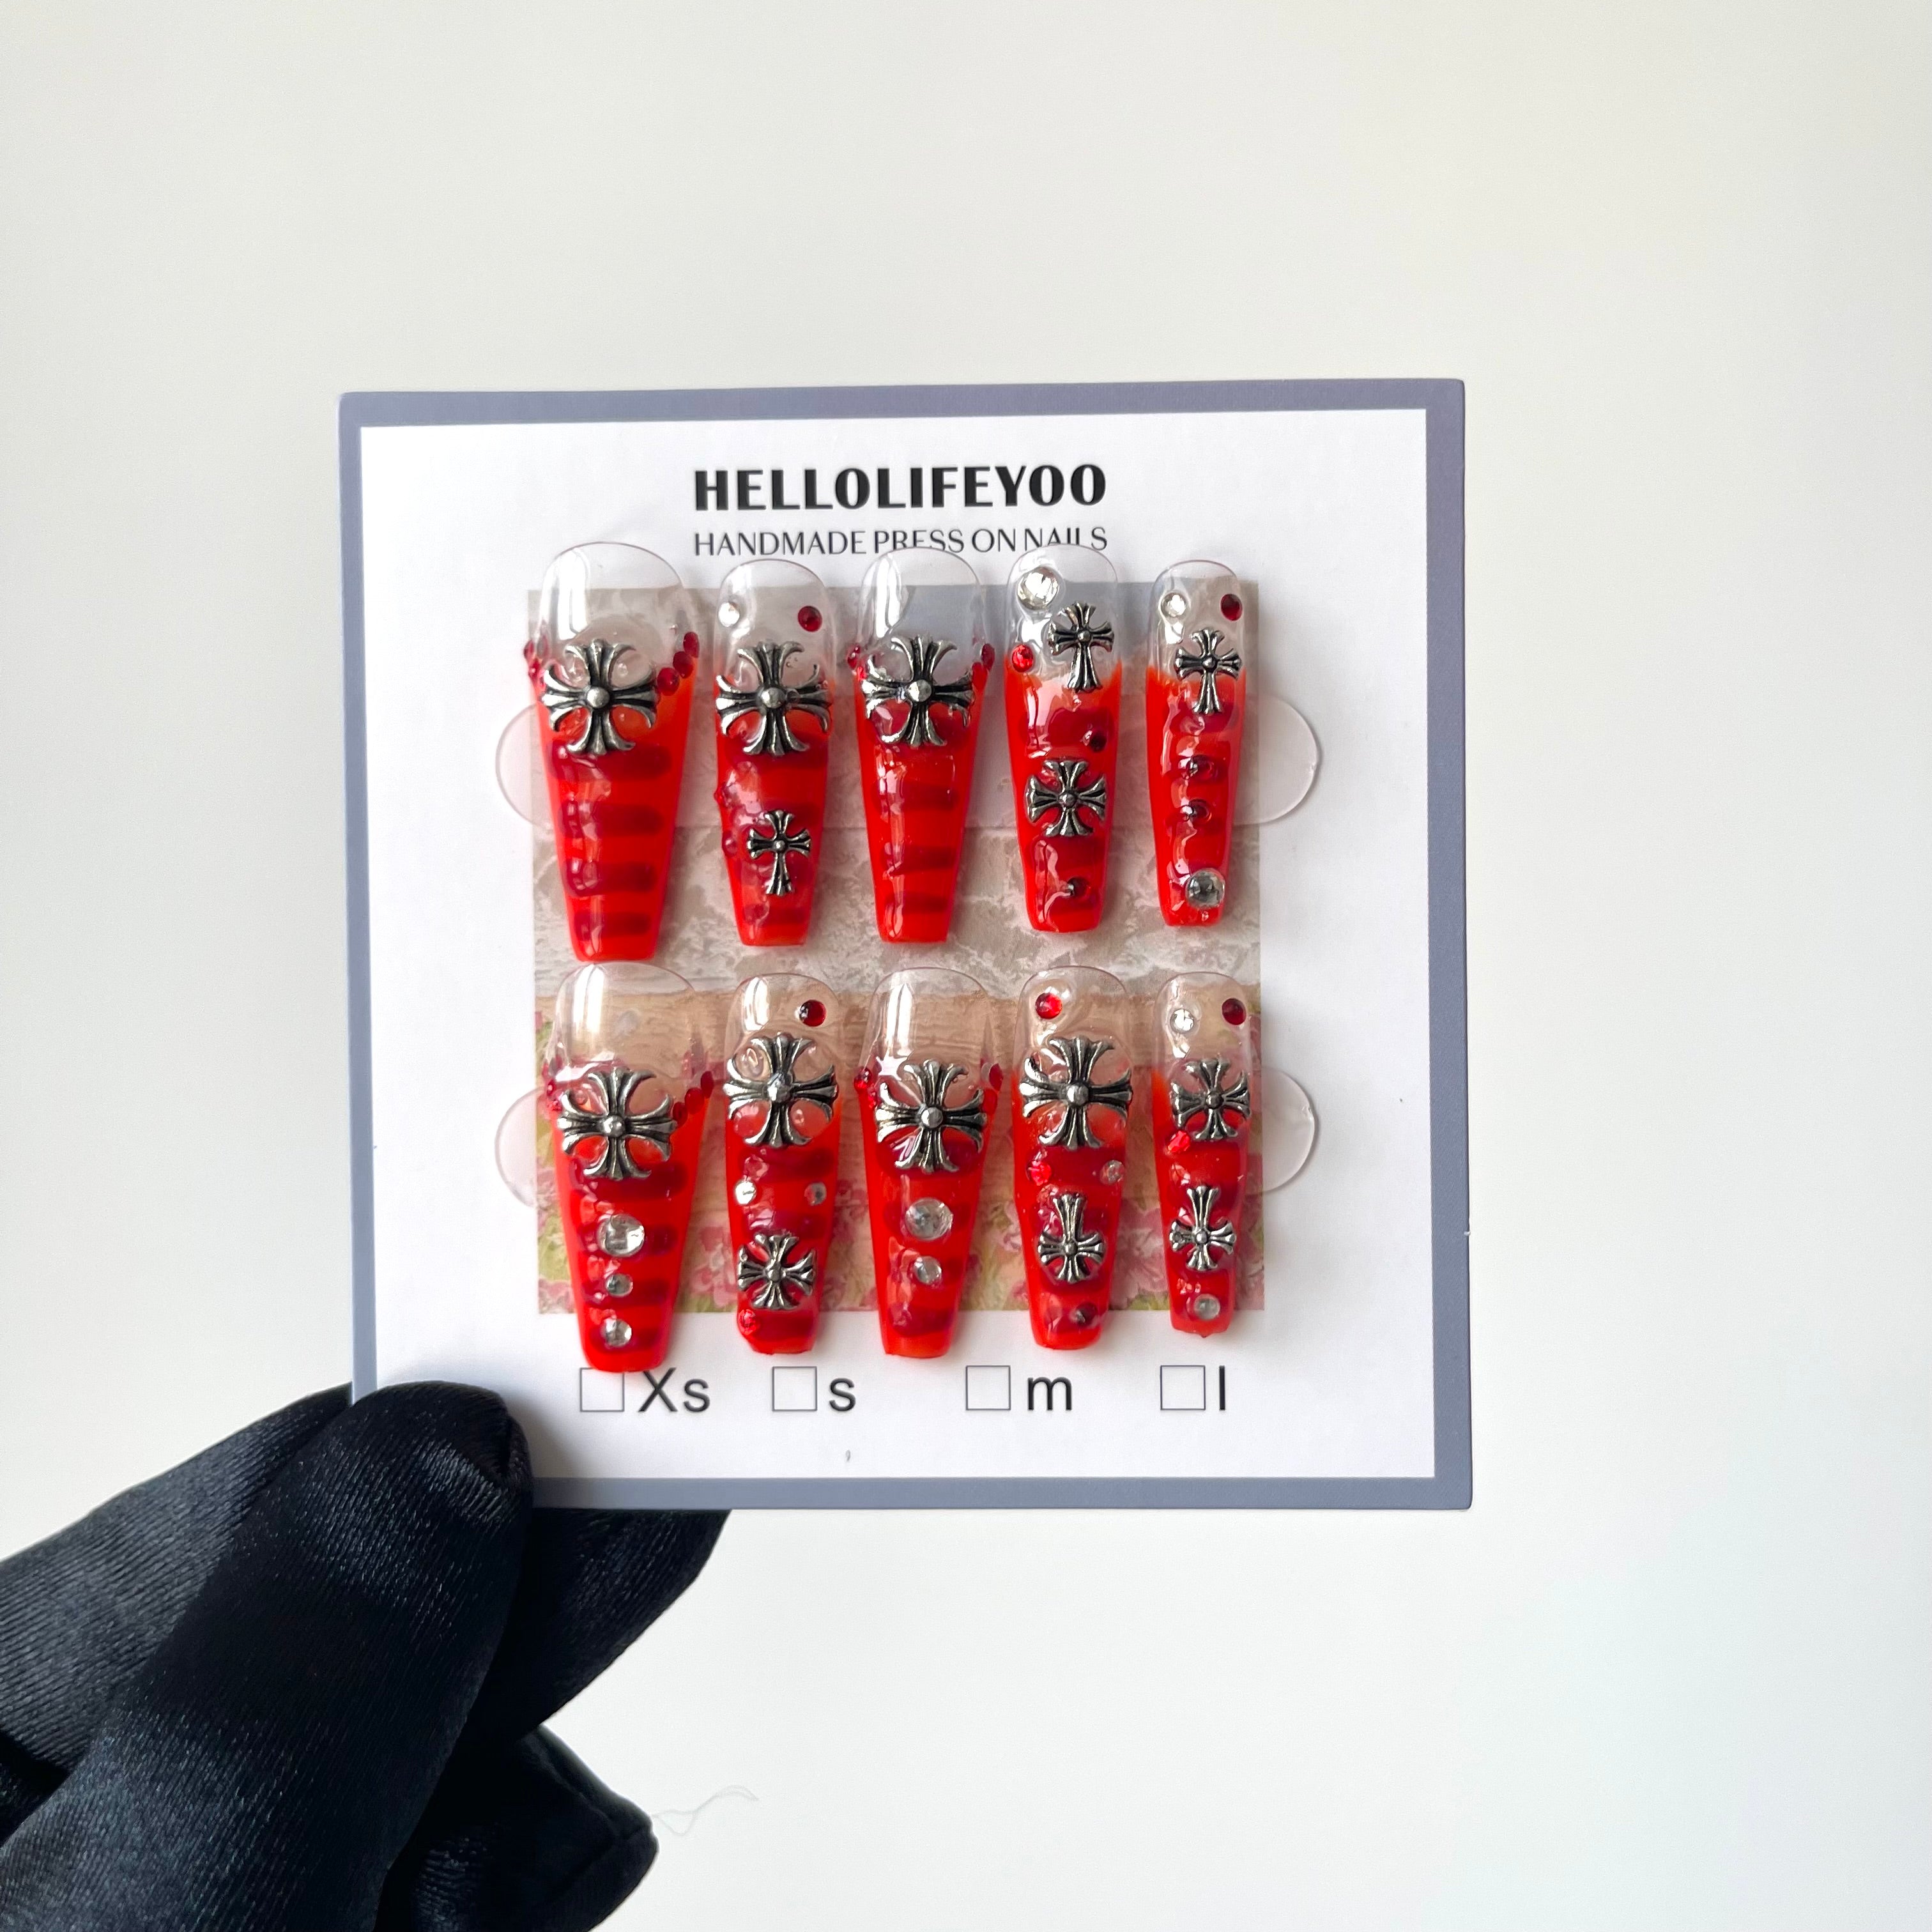 BLOOD RED CROSS -TEN PIECES OF HANDCRAFTED PRESS ON NAIL